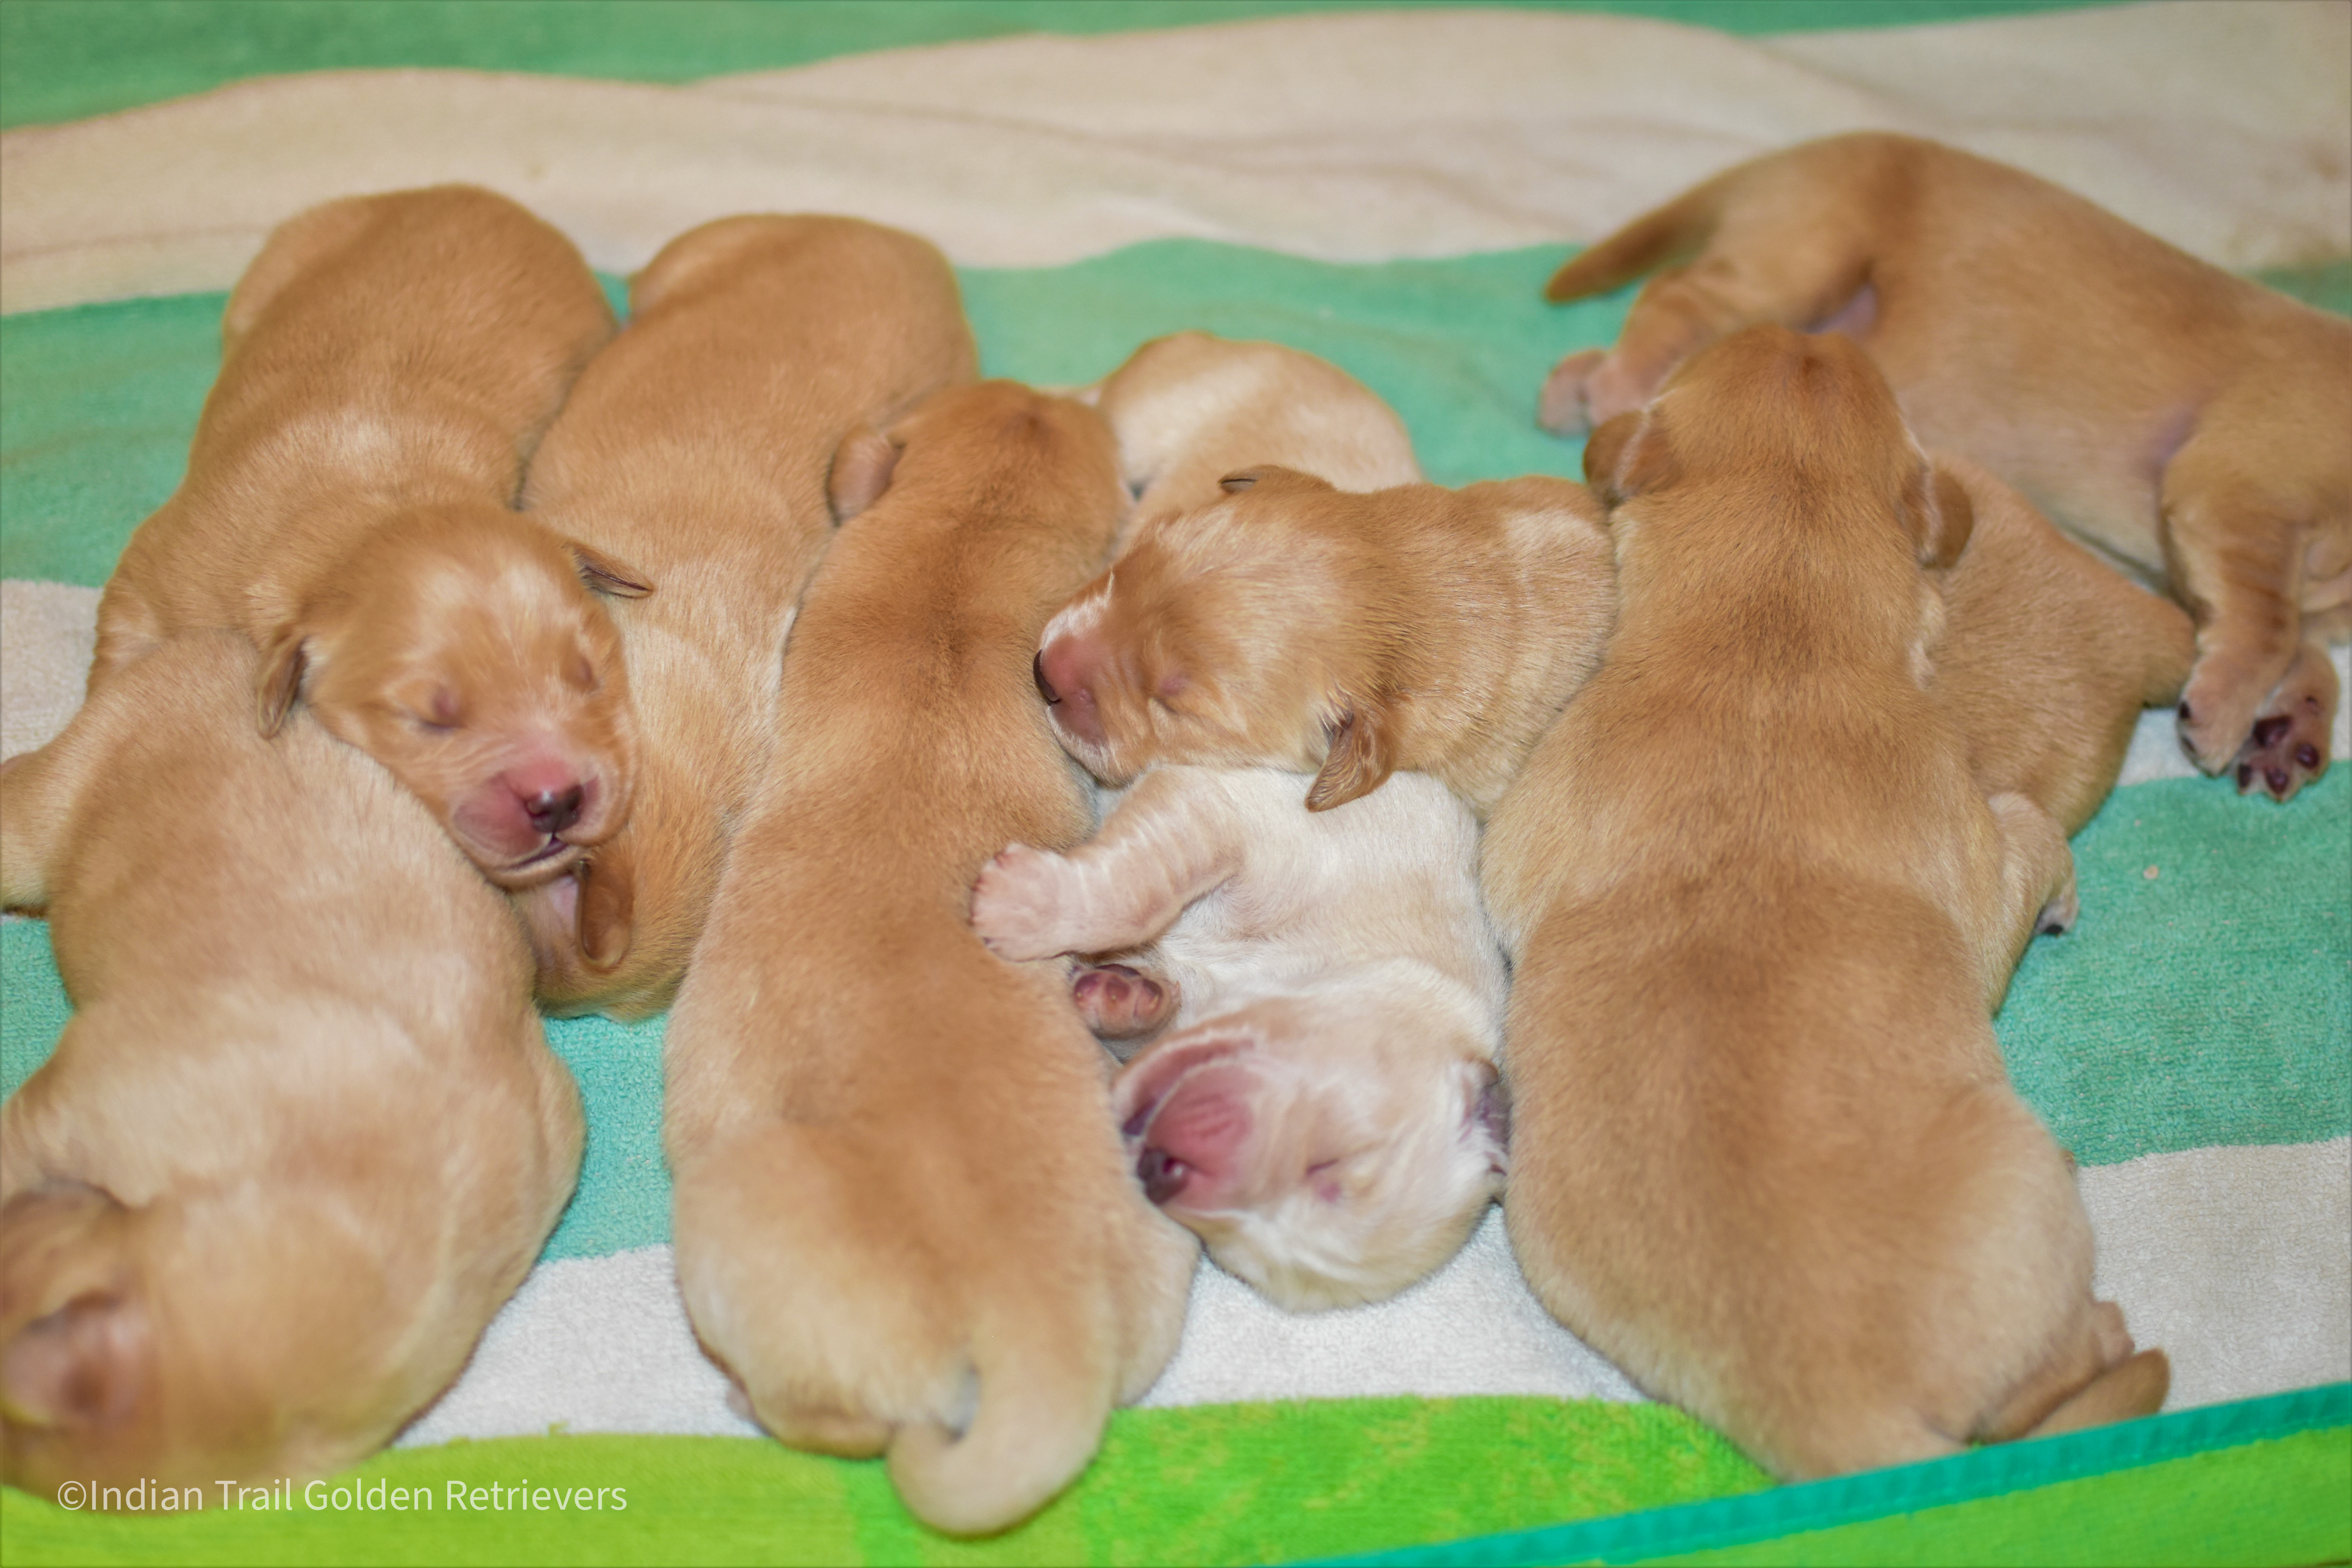 Golden Retriever puppies laying together